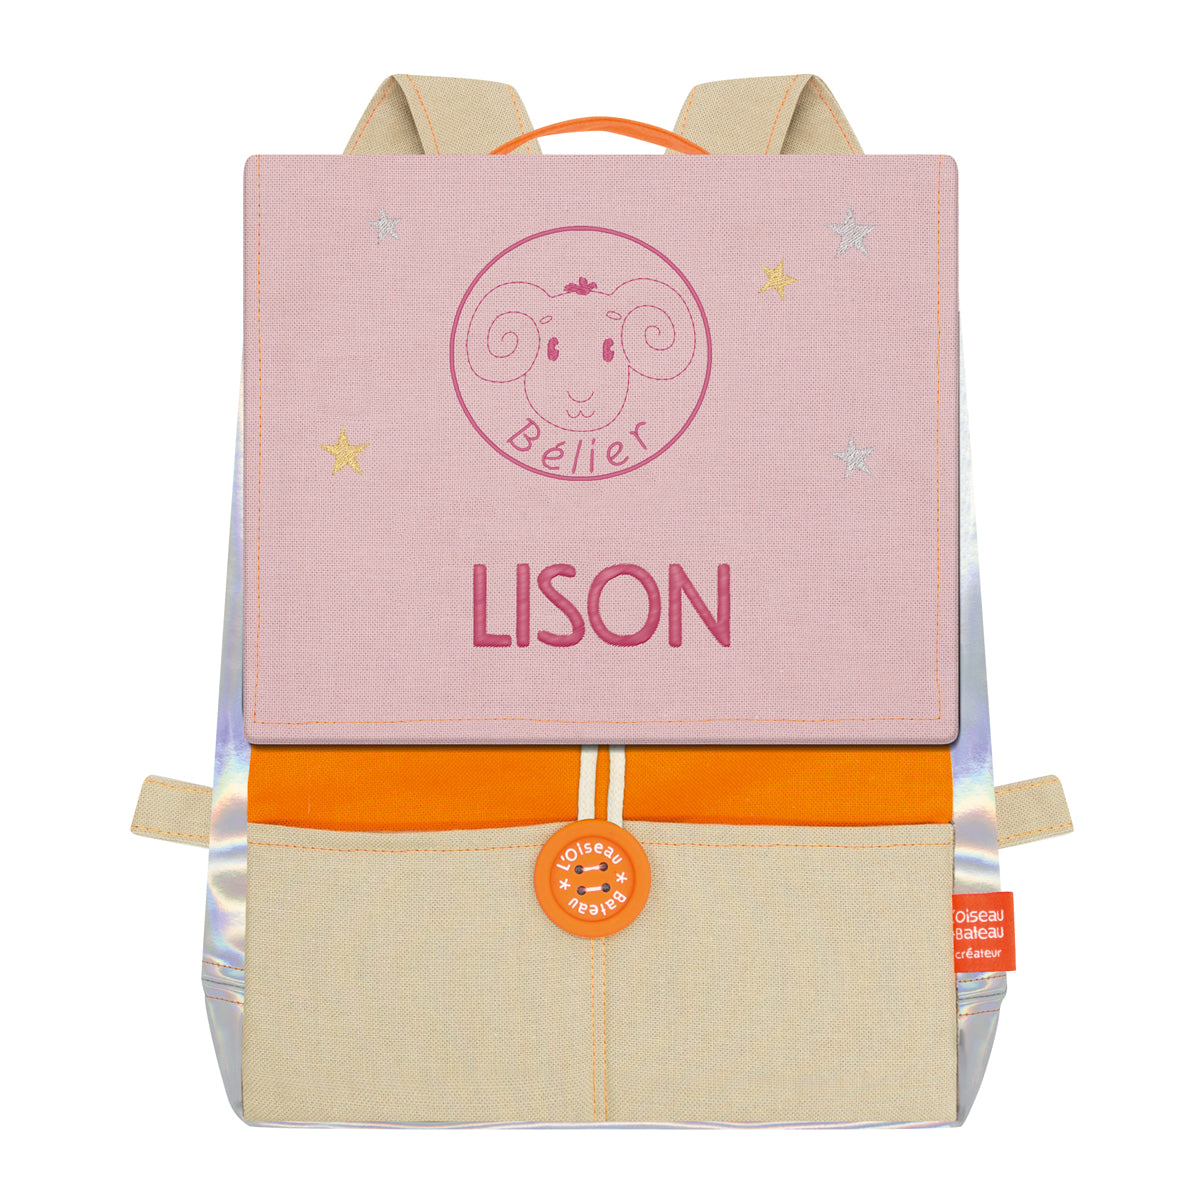 Personalized Astro children's backpack - Orange and Powder